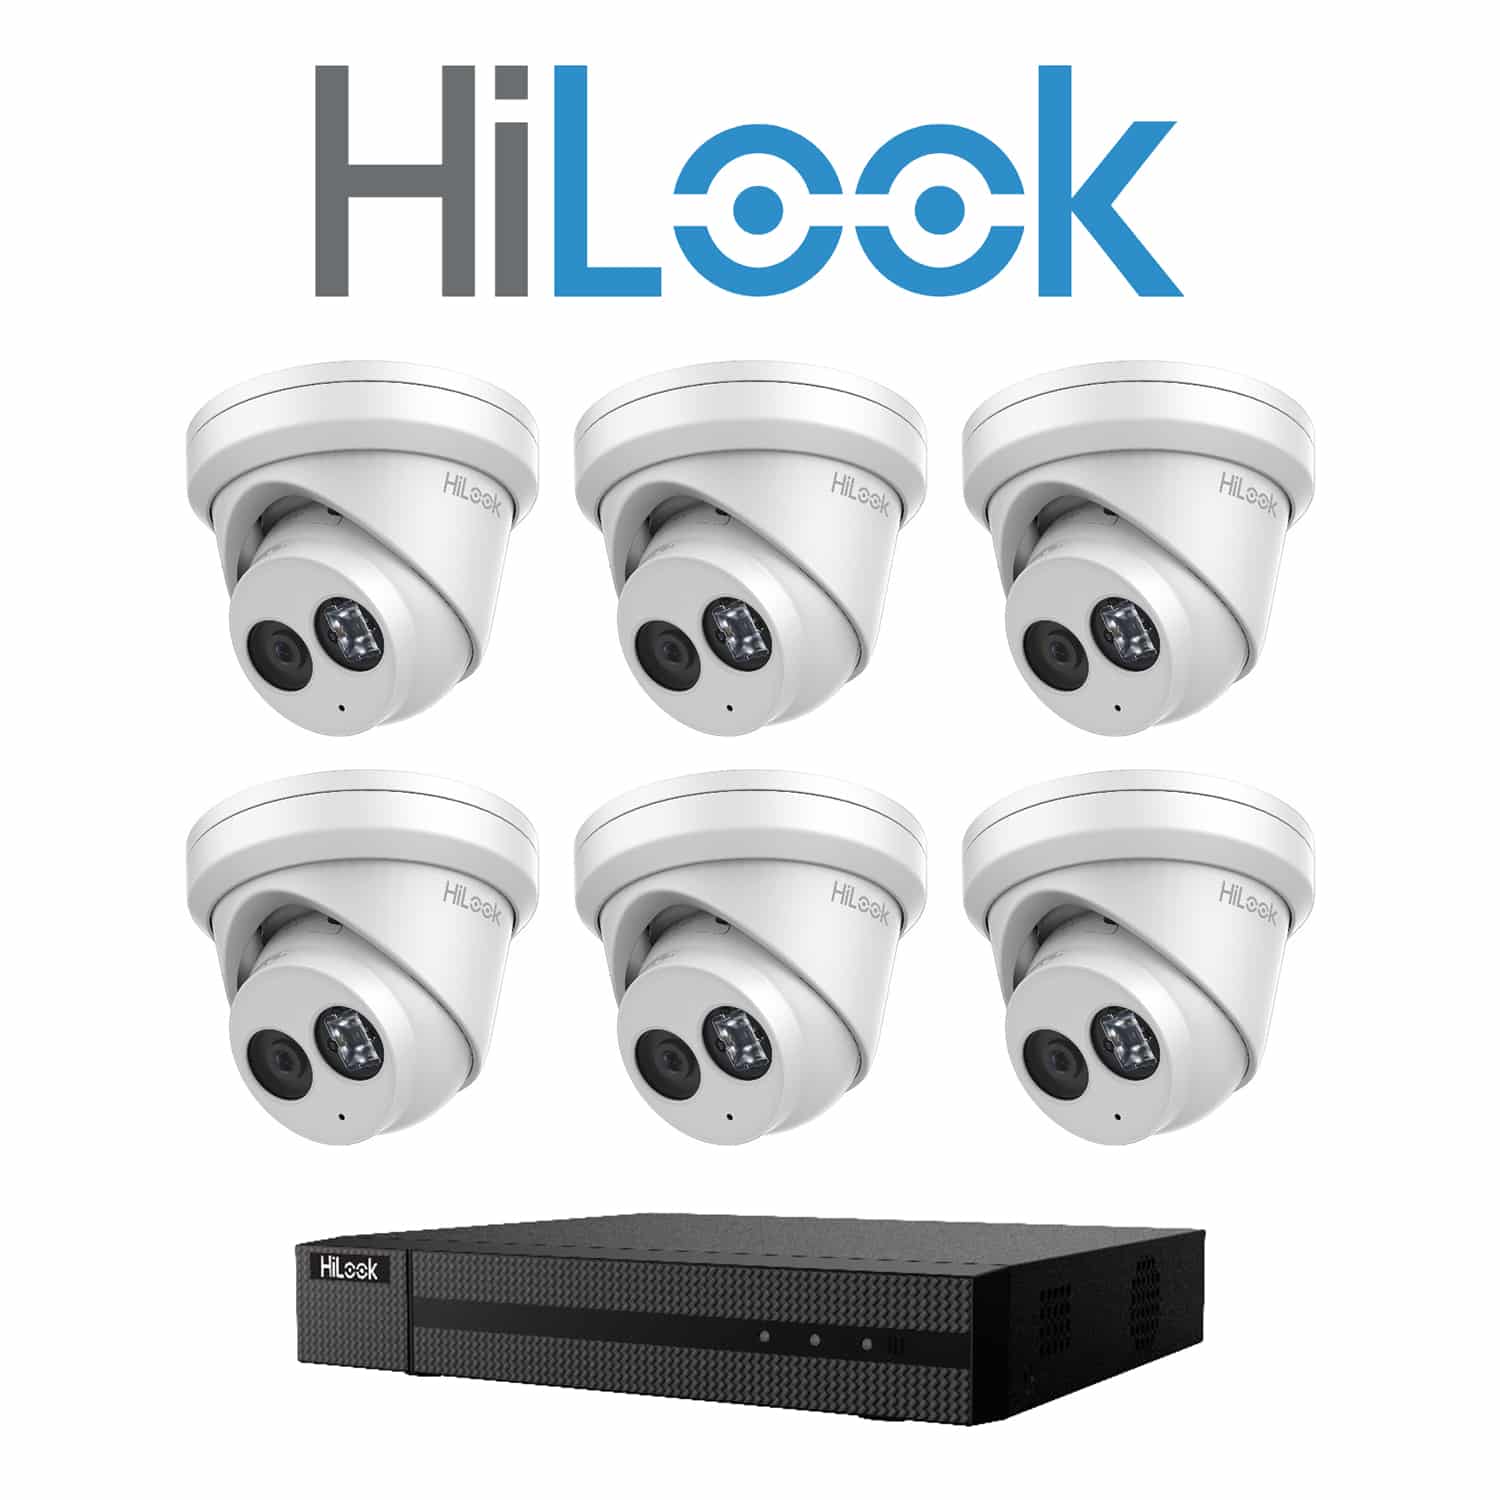 Hilook 8MP 6 camera package